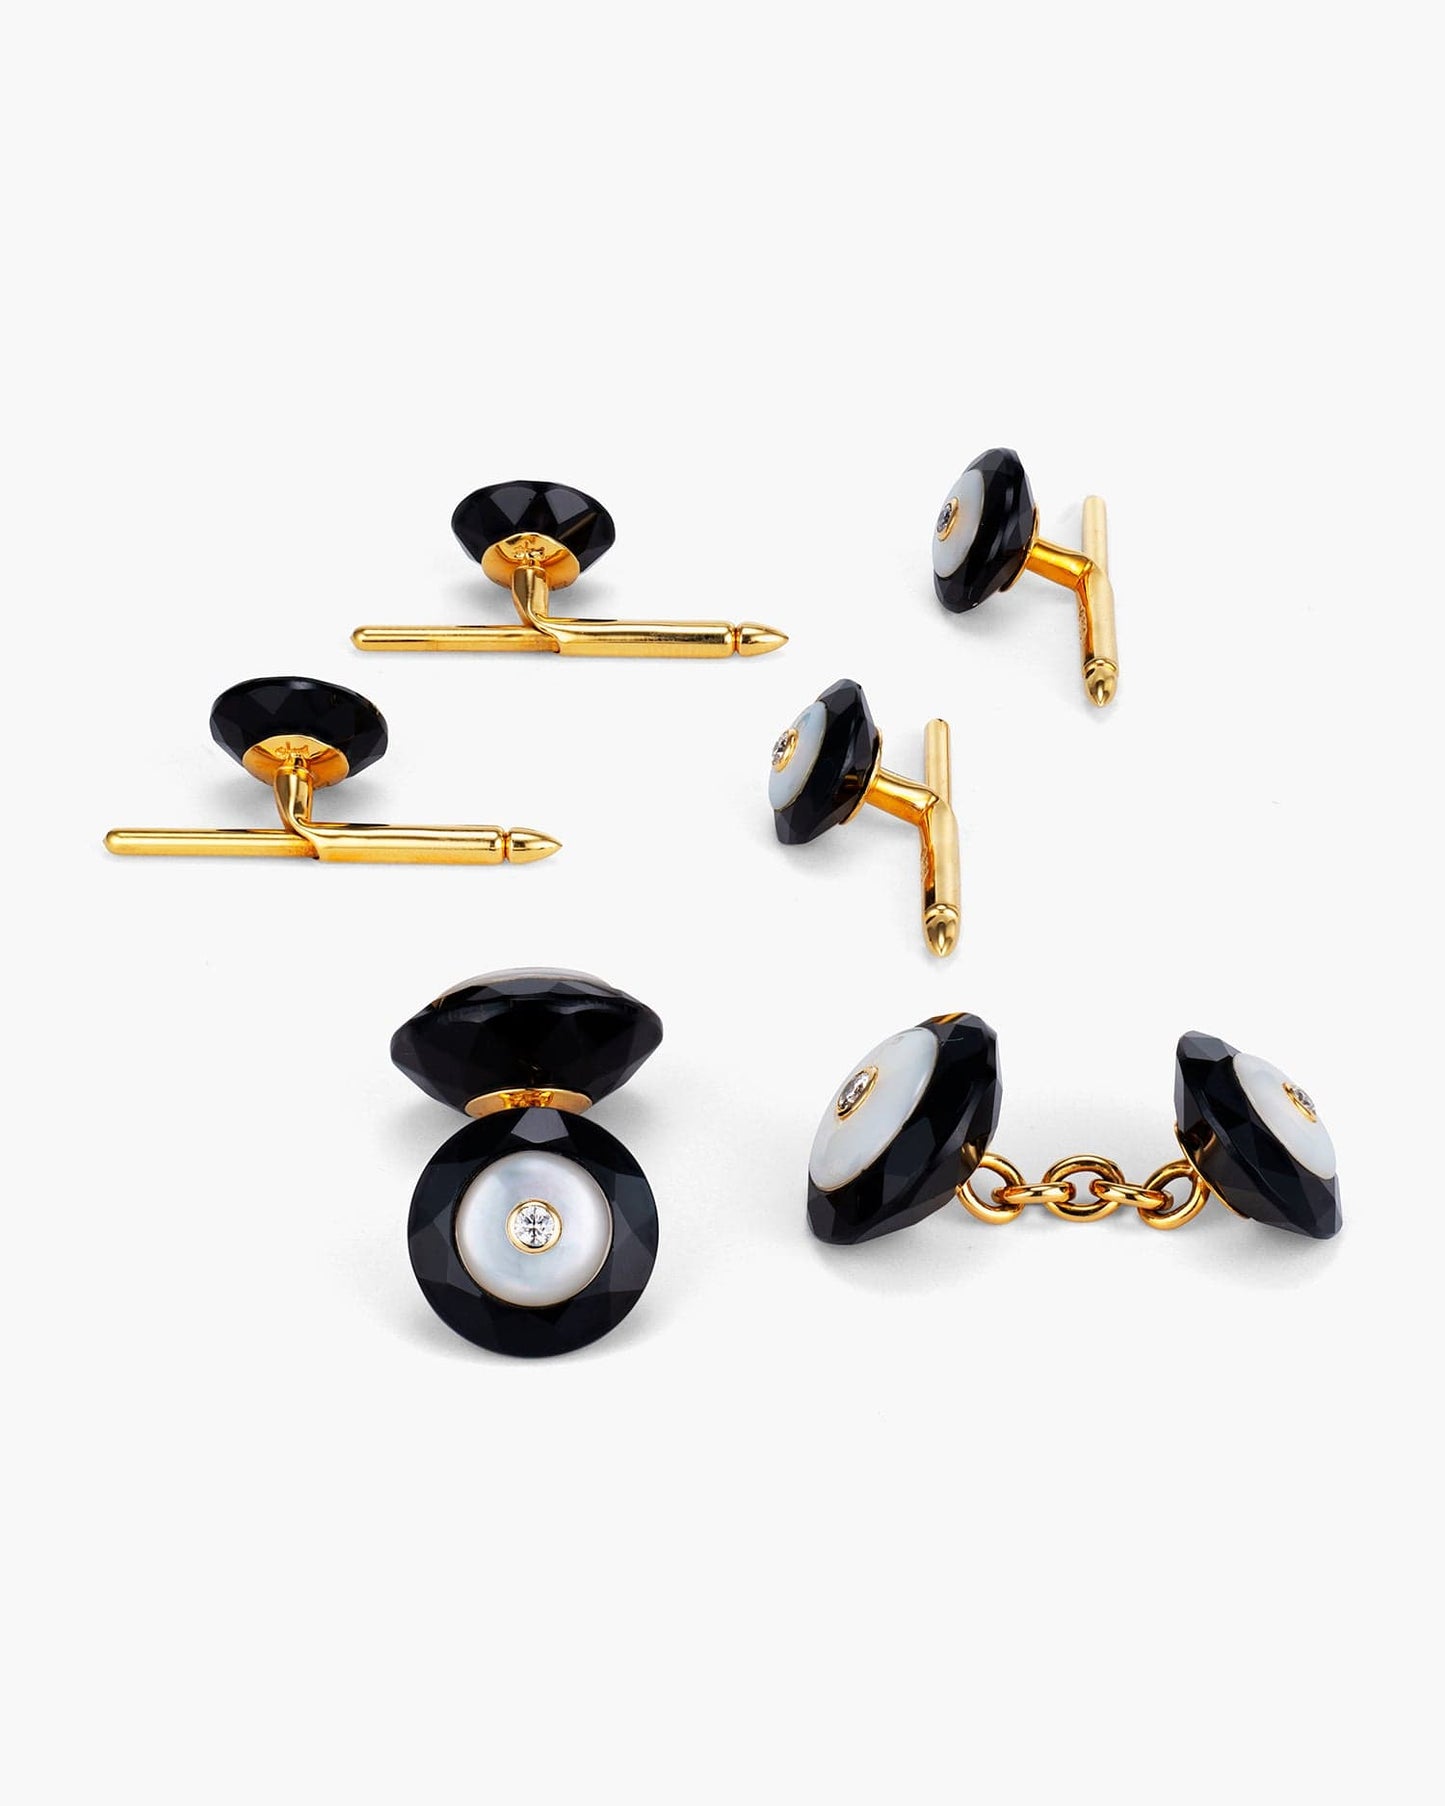 Diamond, Onyx and Mother of Pearl Tuxedo Cufflinks and Stud Set